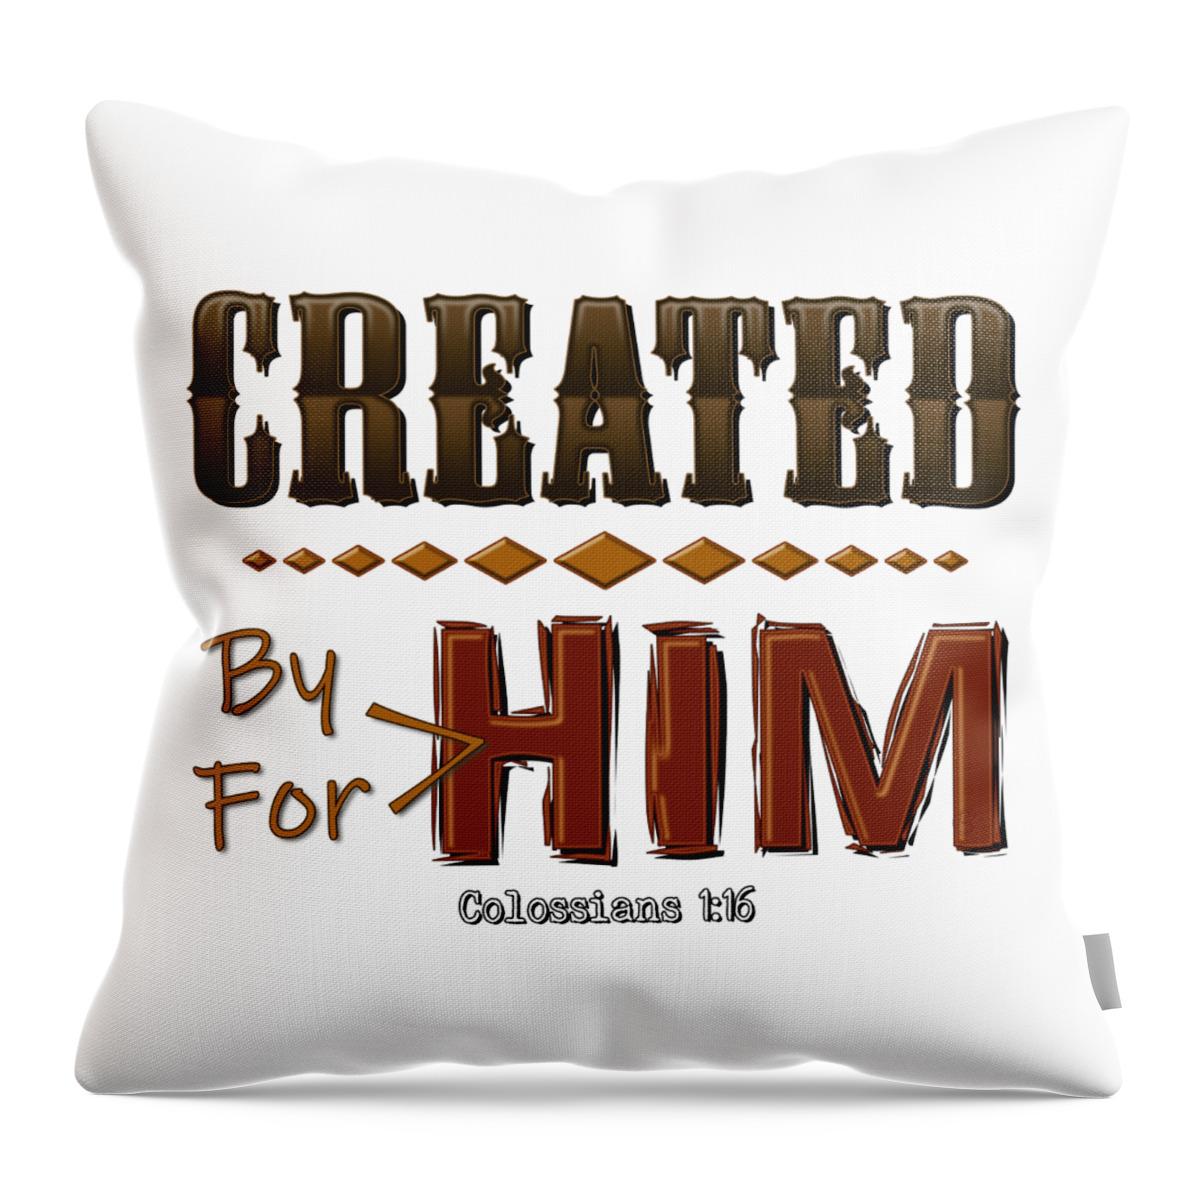 Colossians 1:16 Throw Pillow featuring the digital art By Him For Him by Rick Bartrand